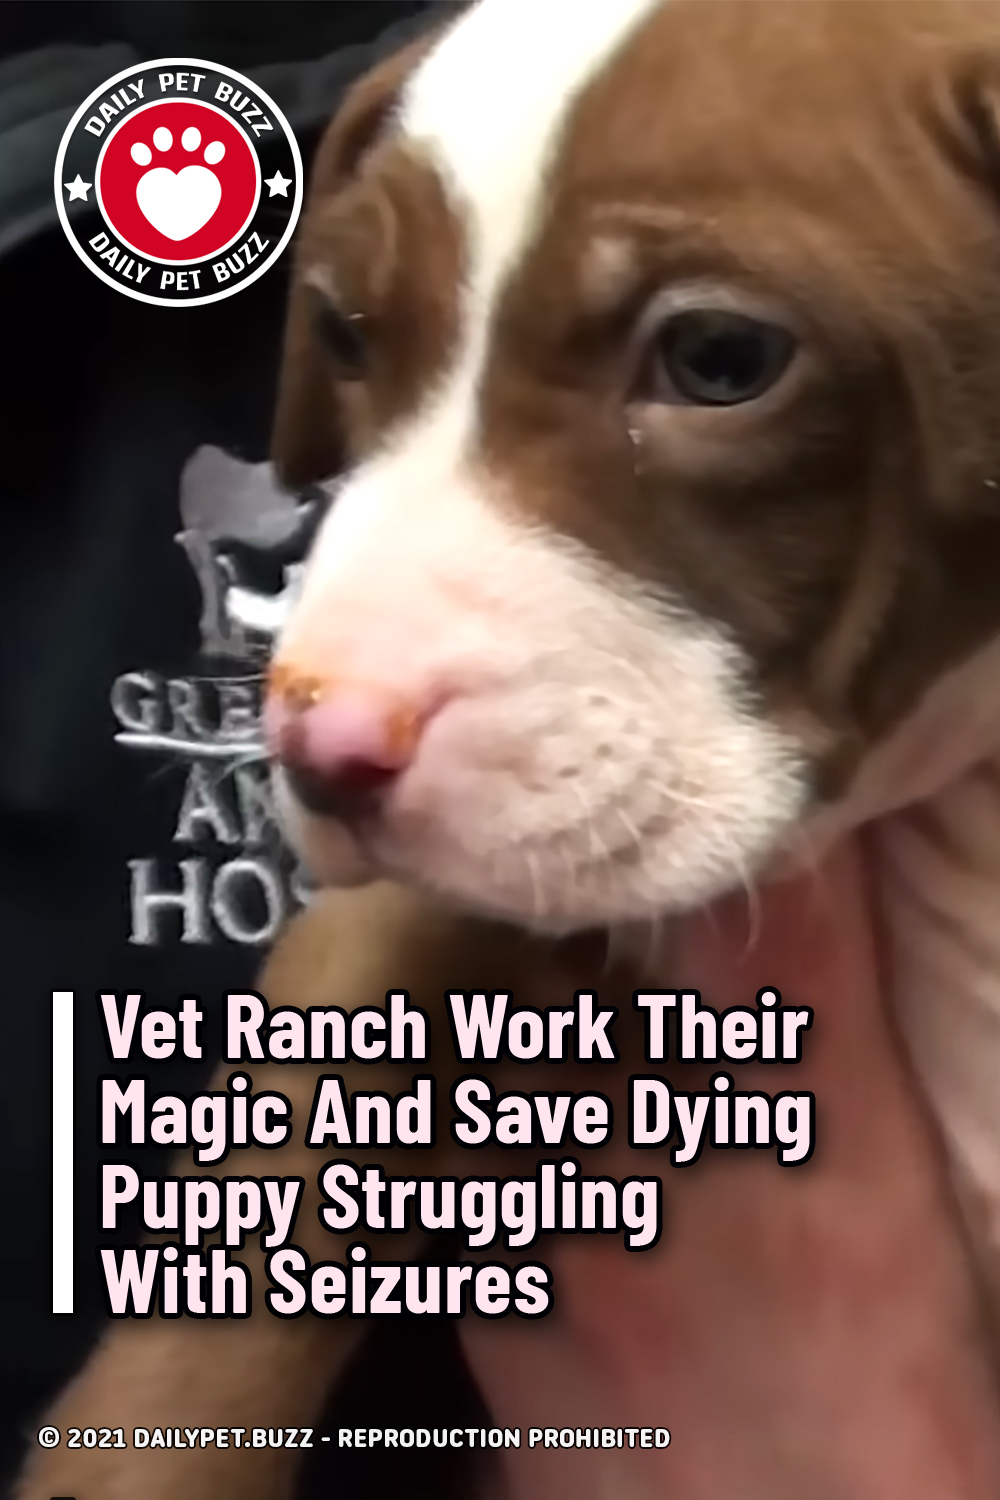 Vet Ranch Work Their Magic And Save Dying Puppy Struggling With Seizures